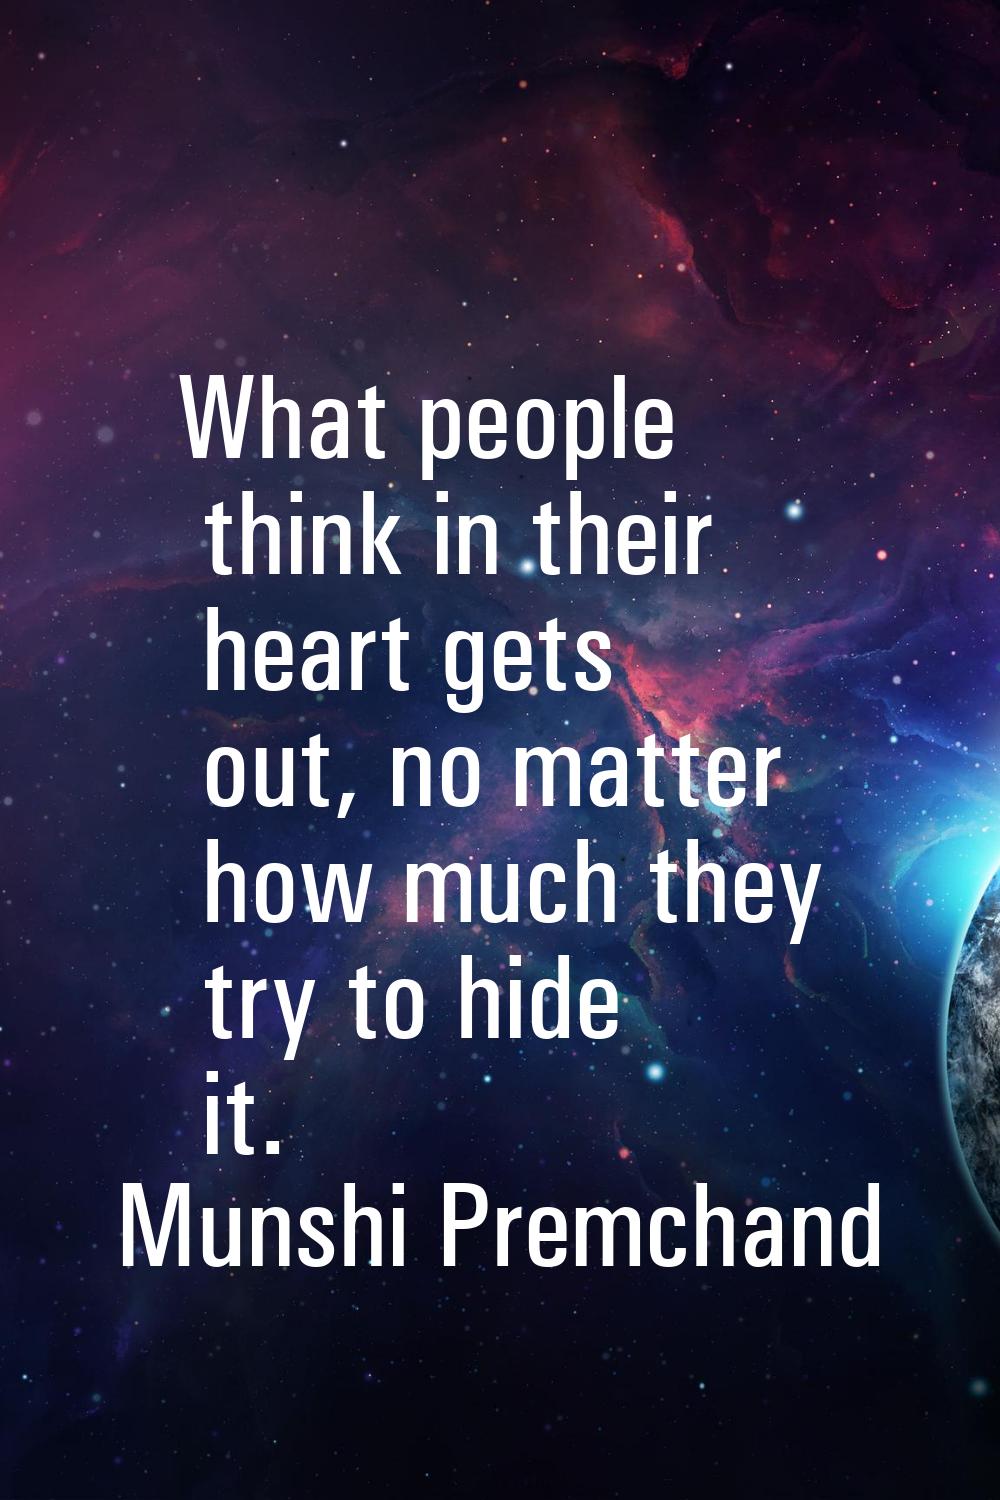 What people think in their heart gets out, no matter how much they try to hide it.